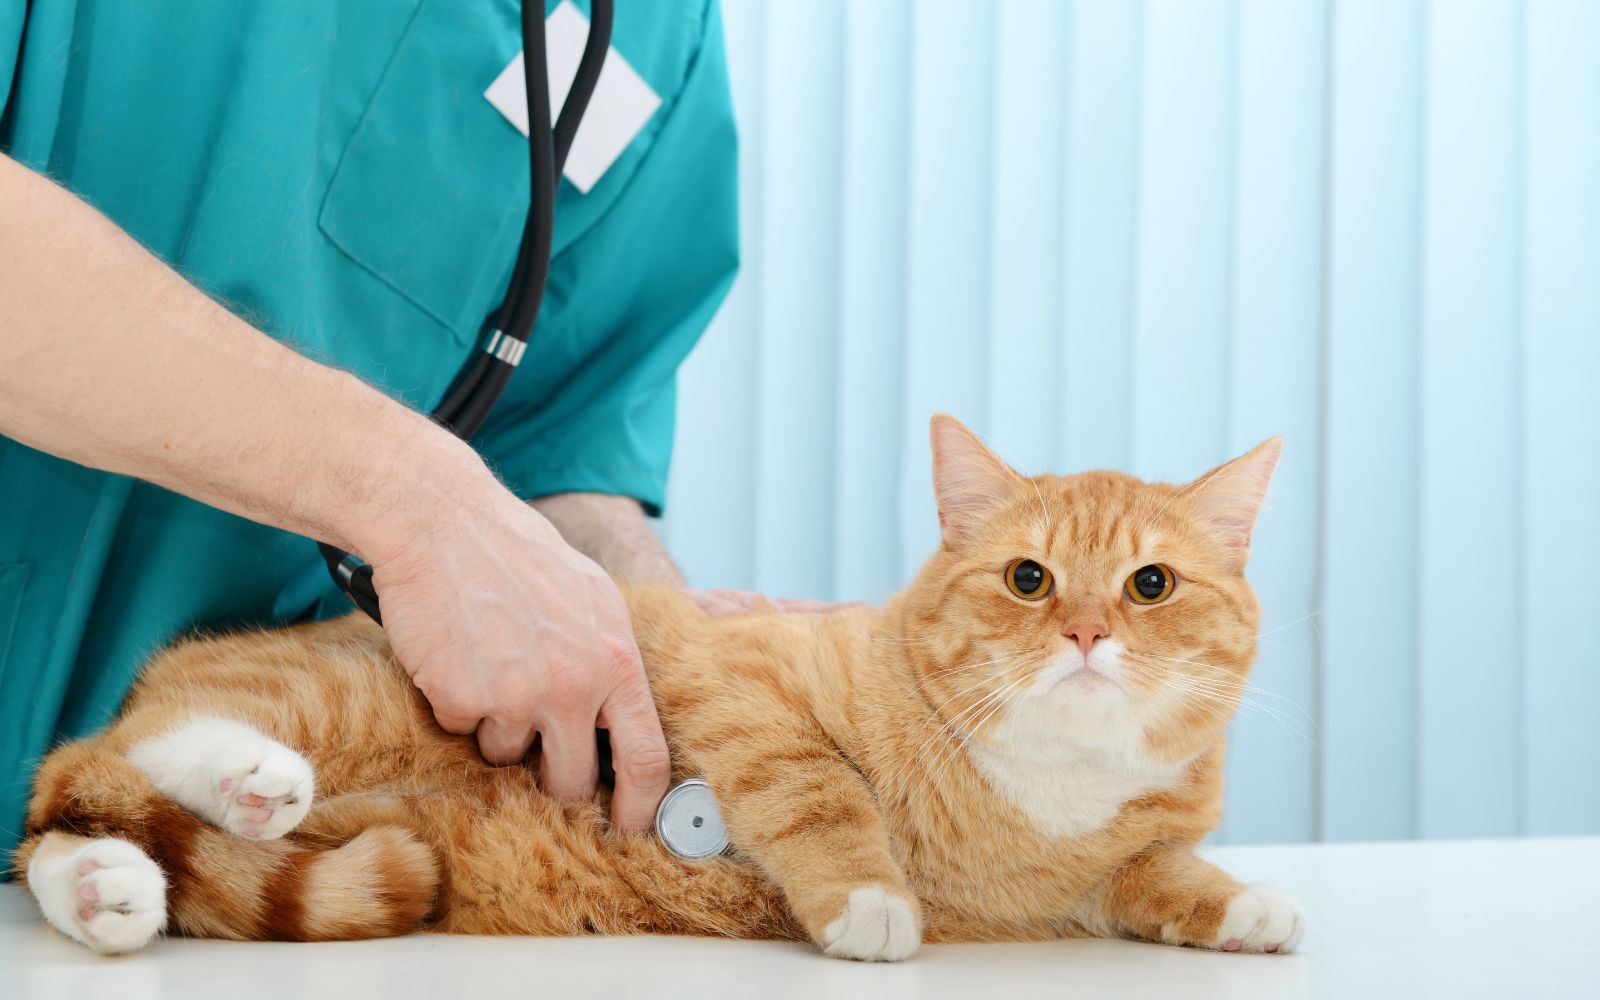 a person using a stethoscope to check the cat's heartbeat